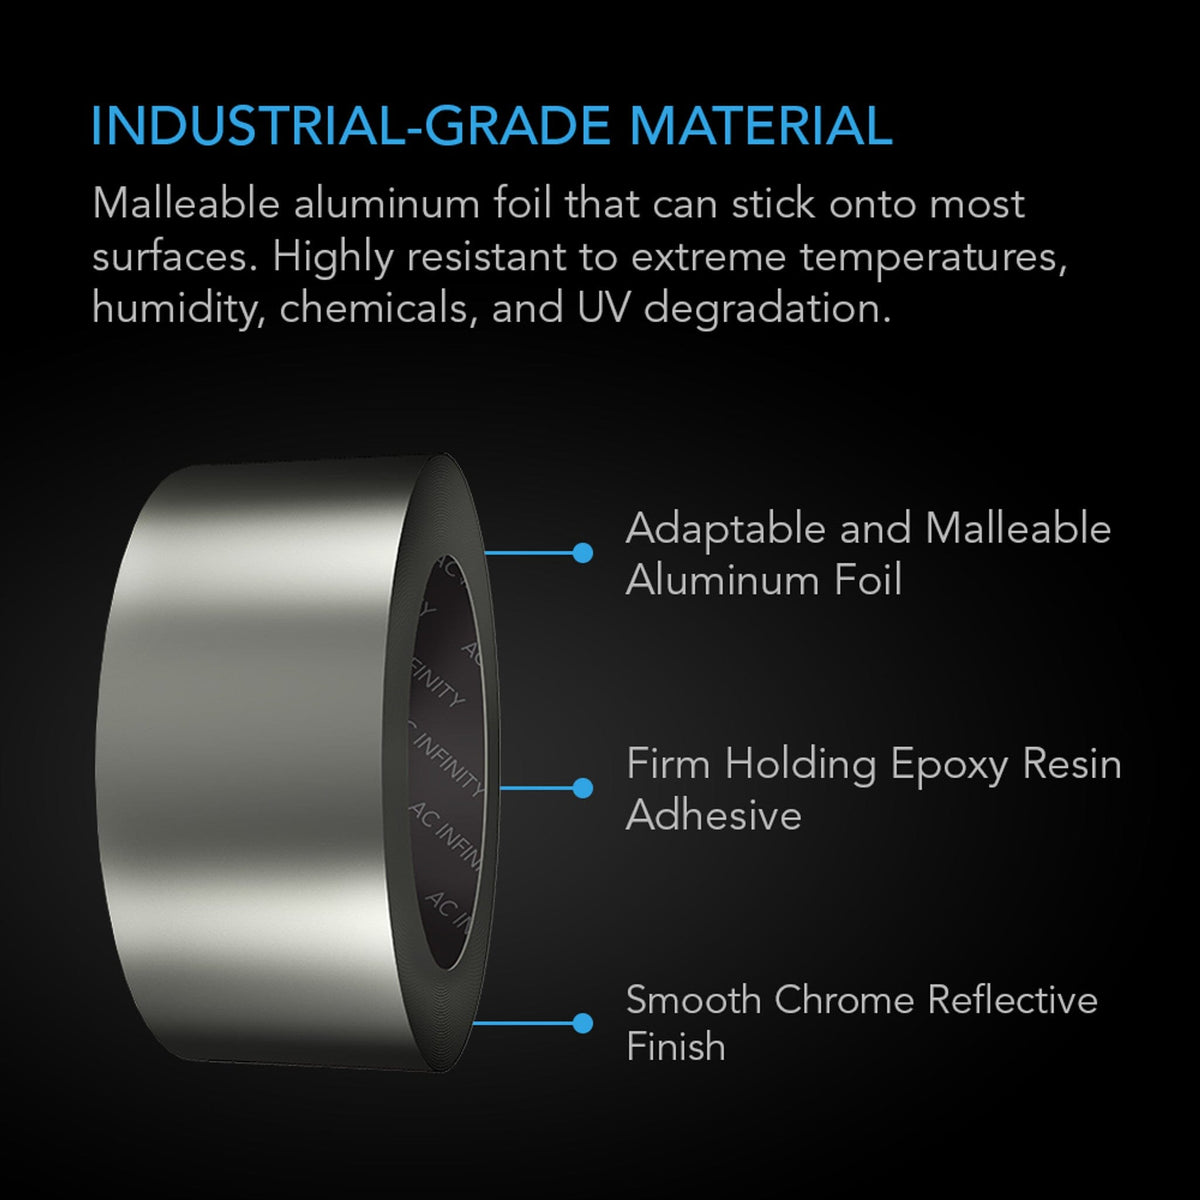 Industrial grade material ducting tape by ac infinity